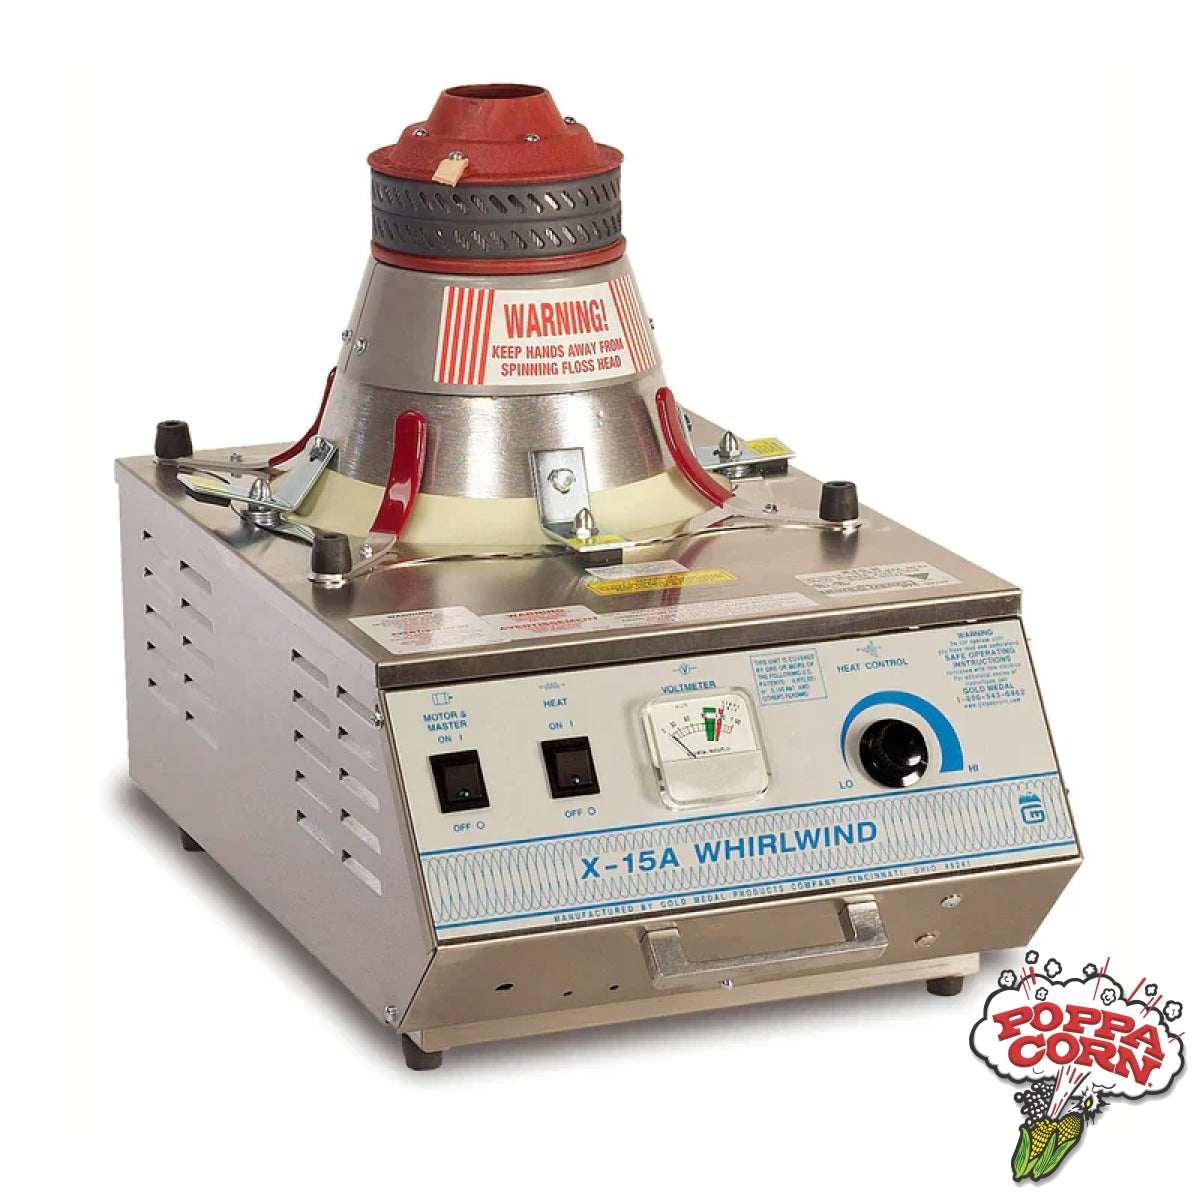 X-15A Stainless Steel Whirlwind® Cotton Candy Machine - Gm3015Peu Demo Equipment